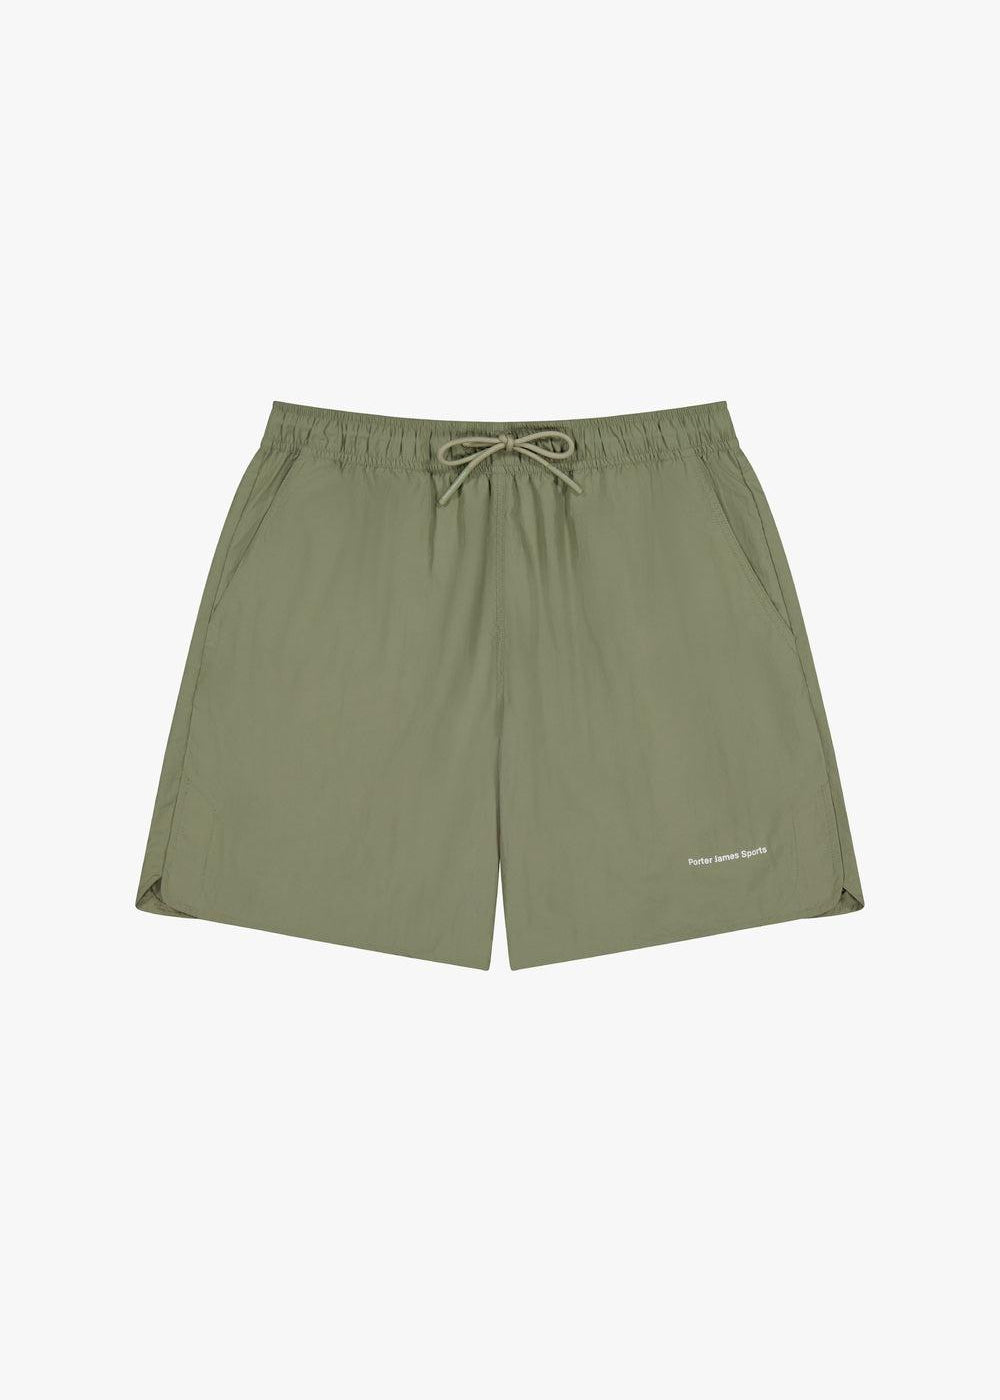 SATURDAY SHORTS / OLIVE | PORTER JAMES SPORTS | Mad About The Boy